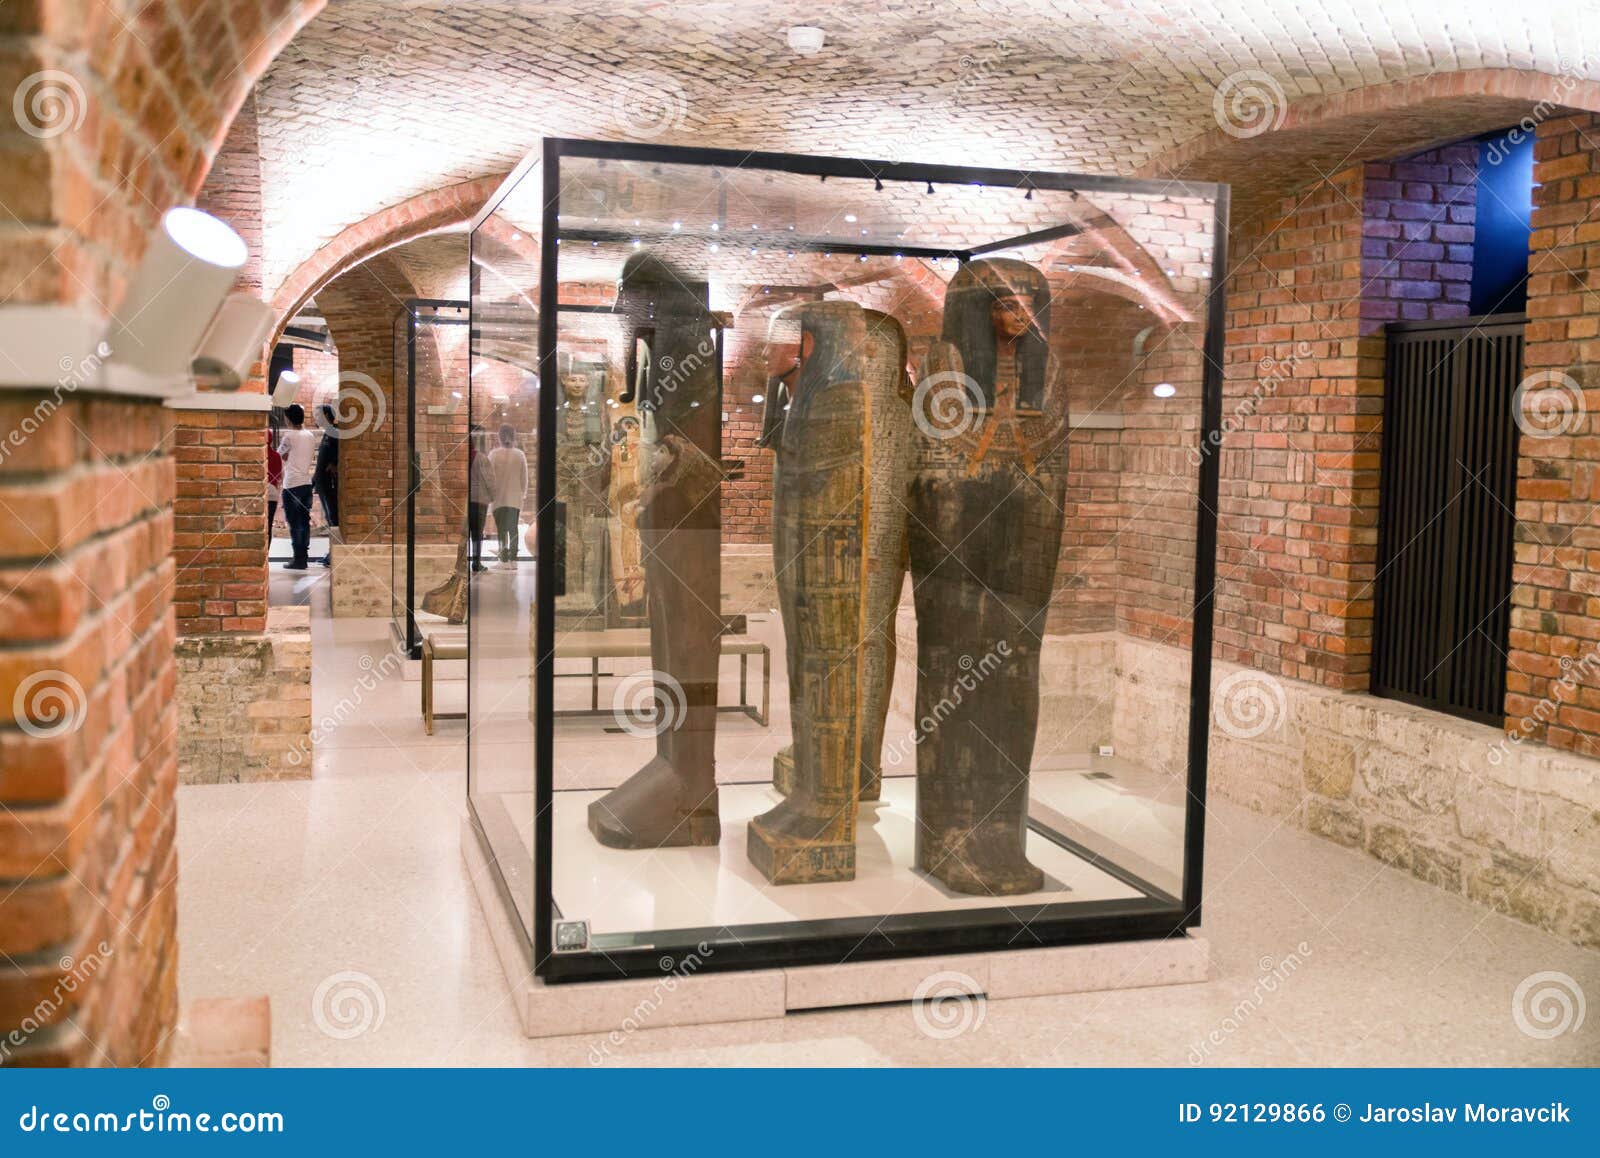 Sarcophagus in Egyptian Museum in Berlin, Germany Editorial Photo ...